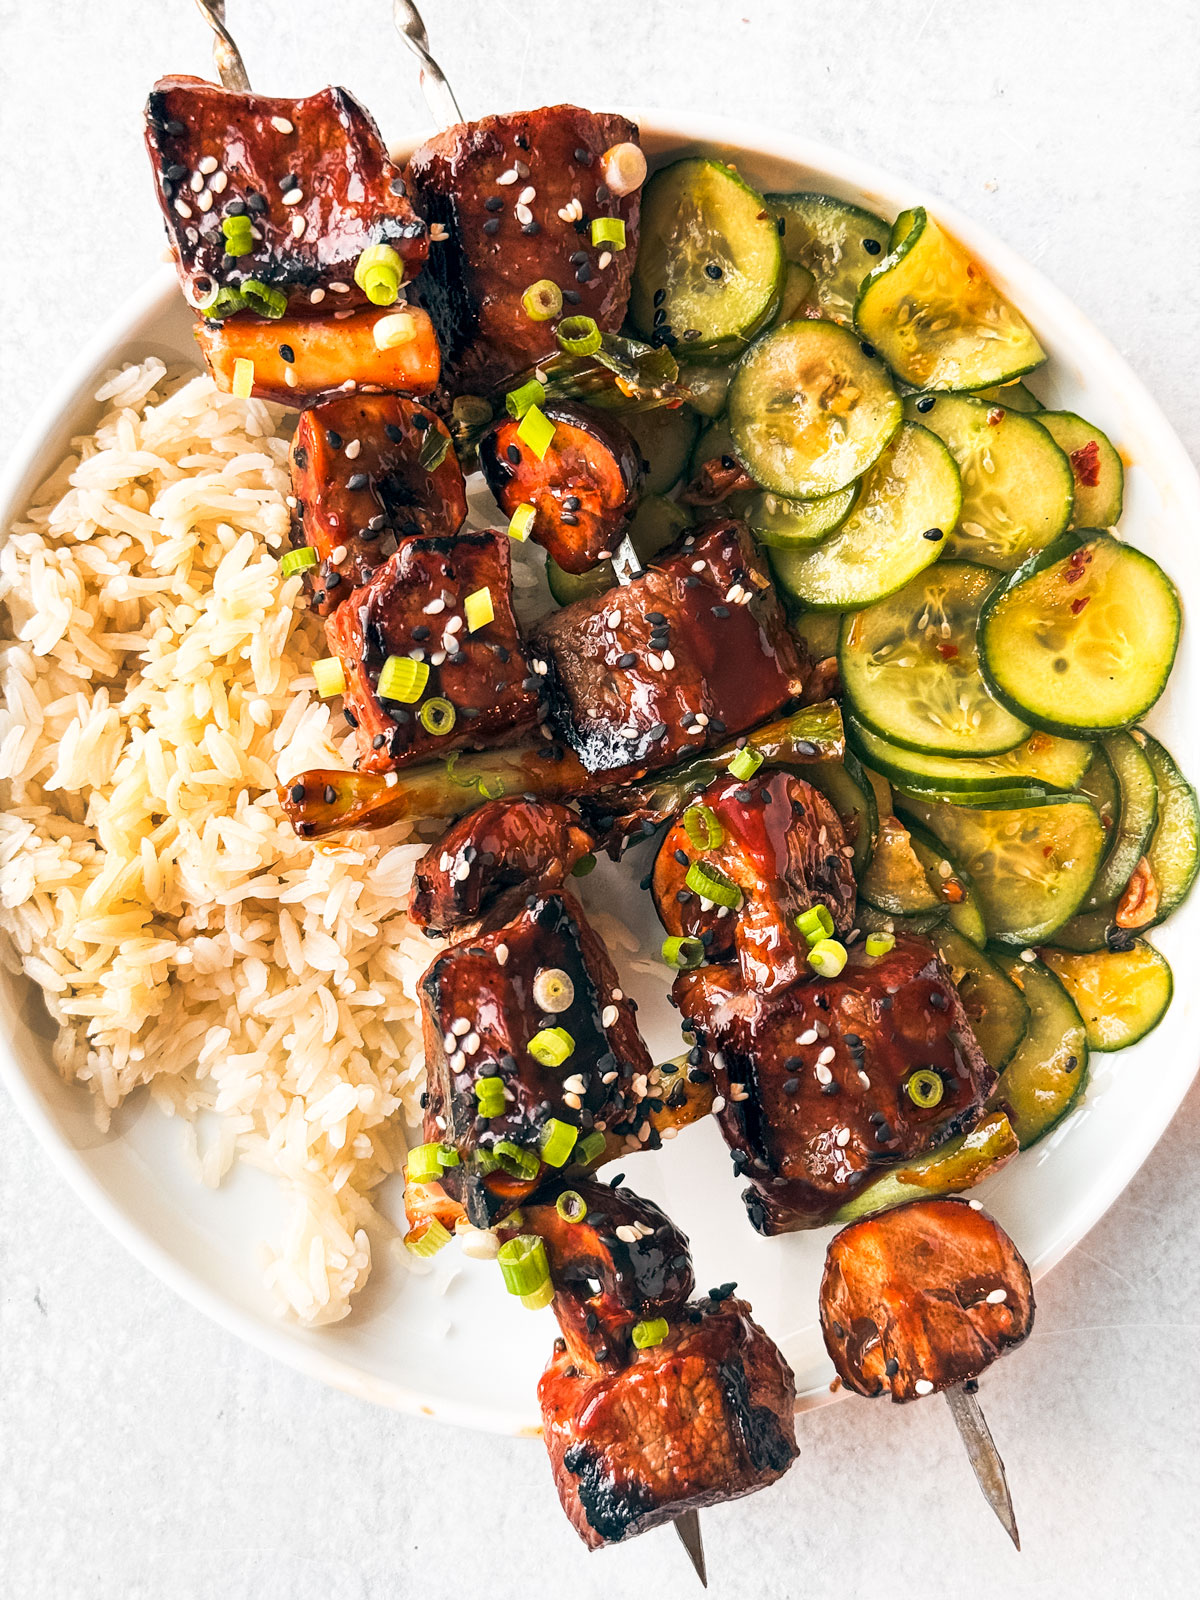 Plate of rice, cucumber salad, and saucy Korean BBQ beef skewers.